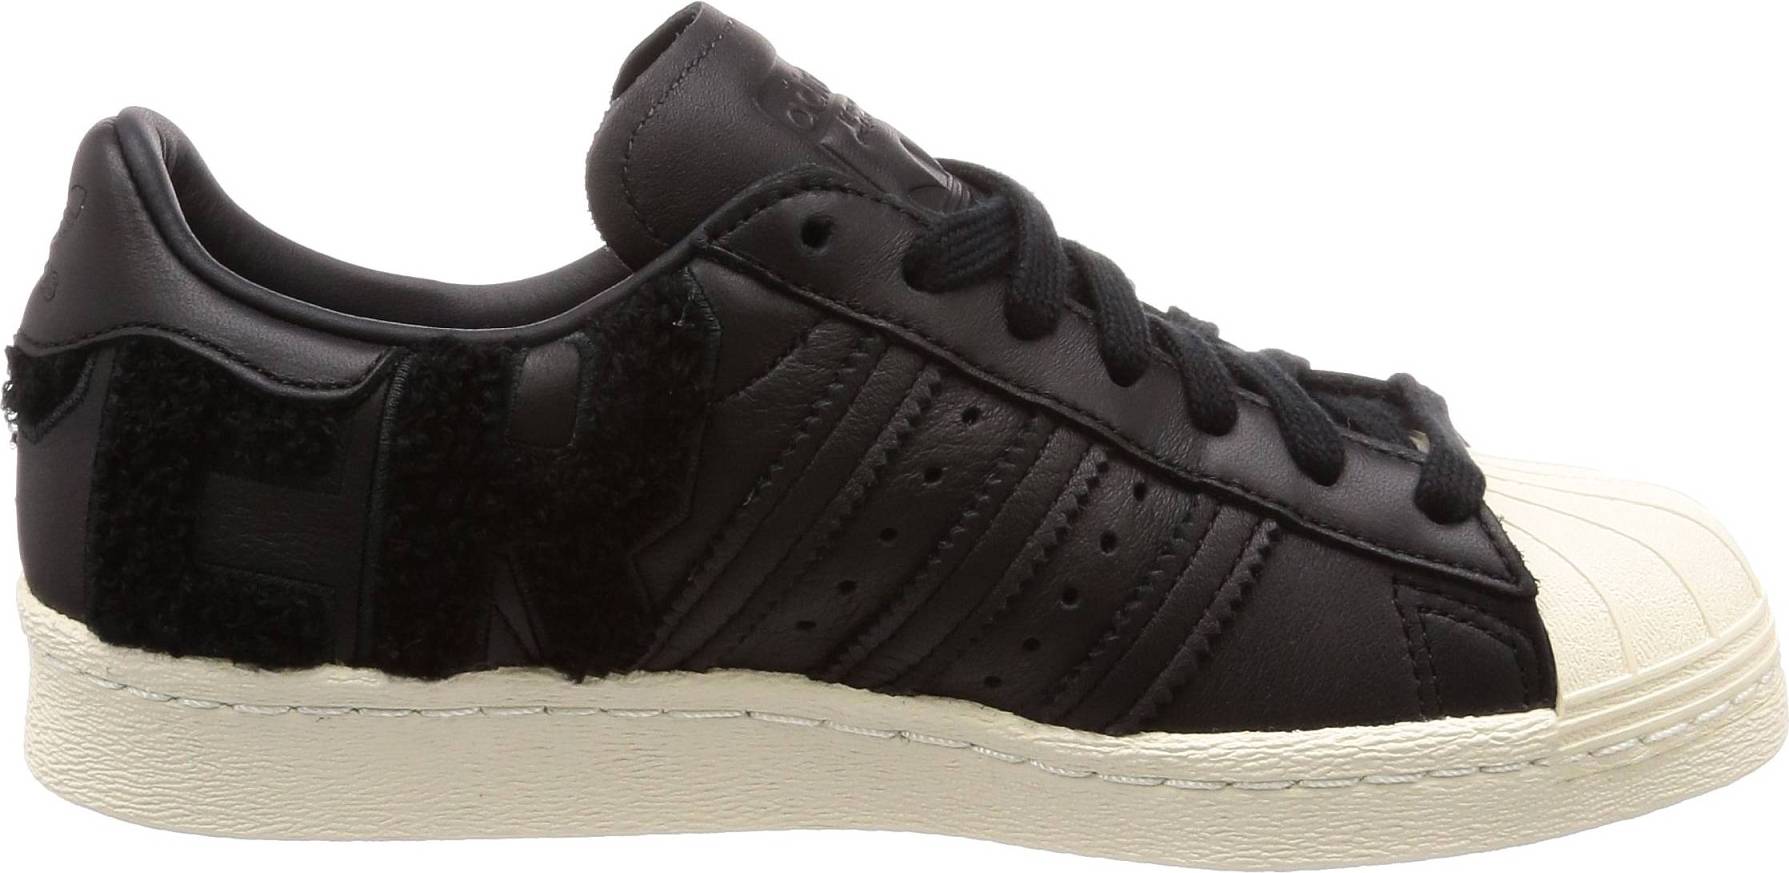 adidas superstar 80s review